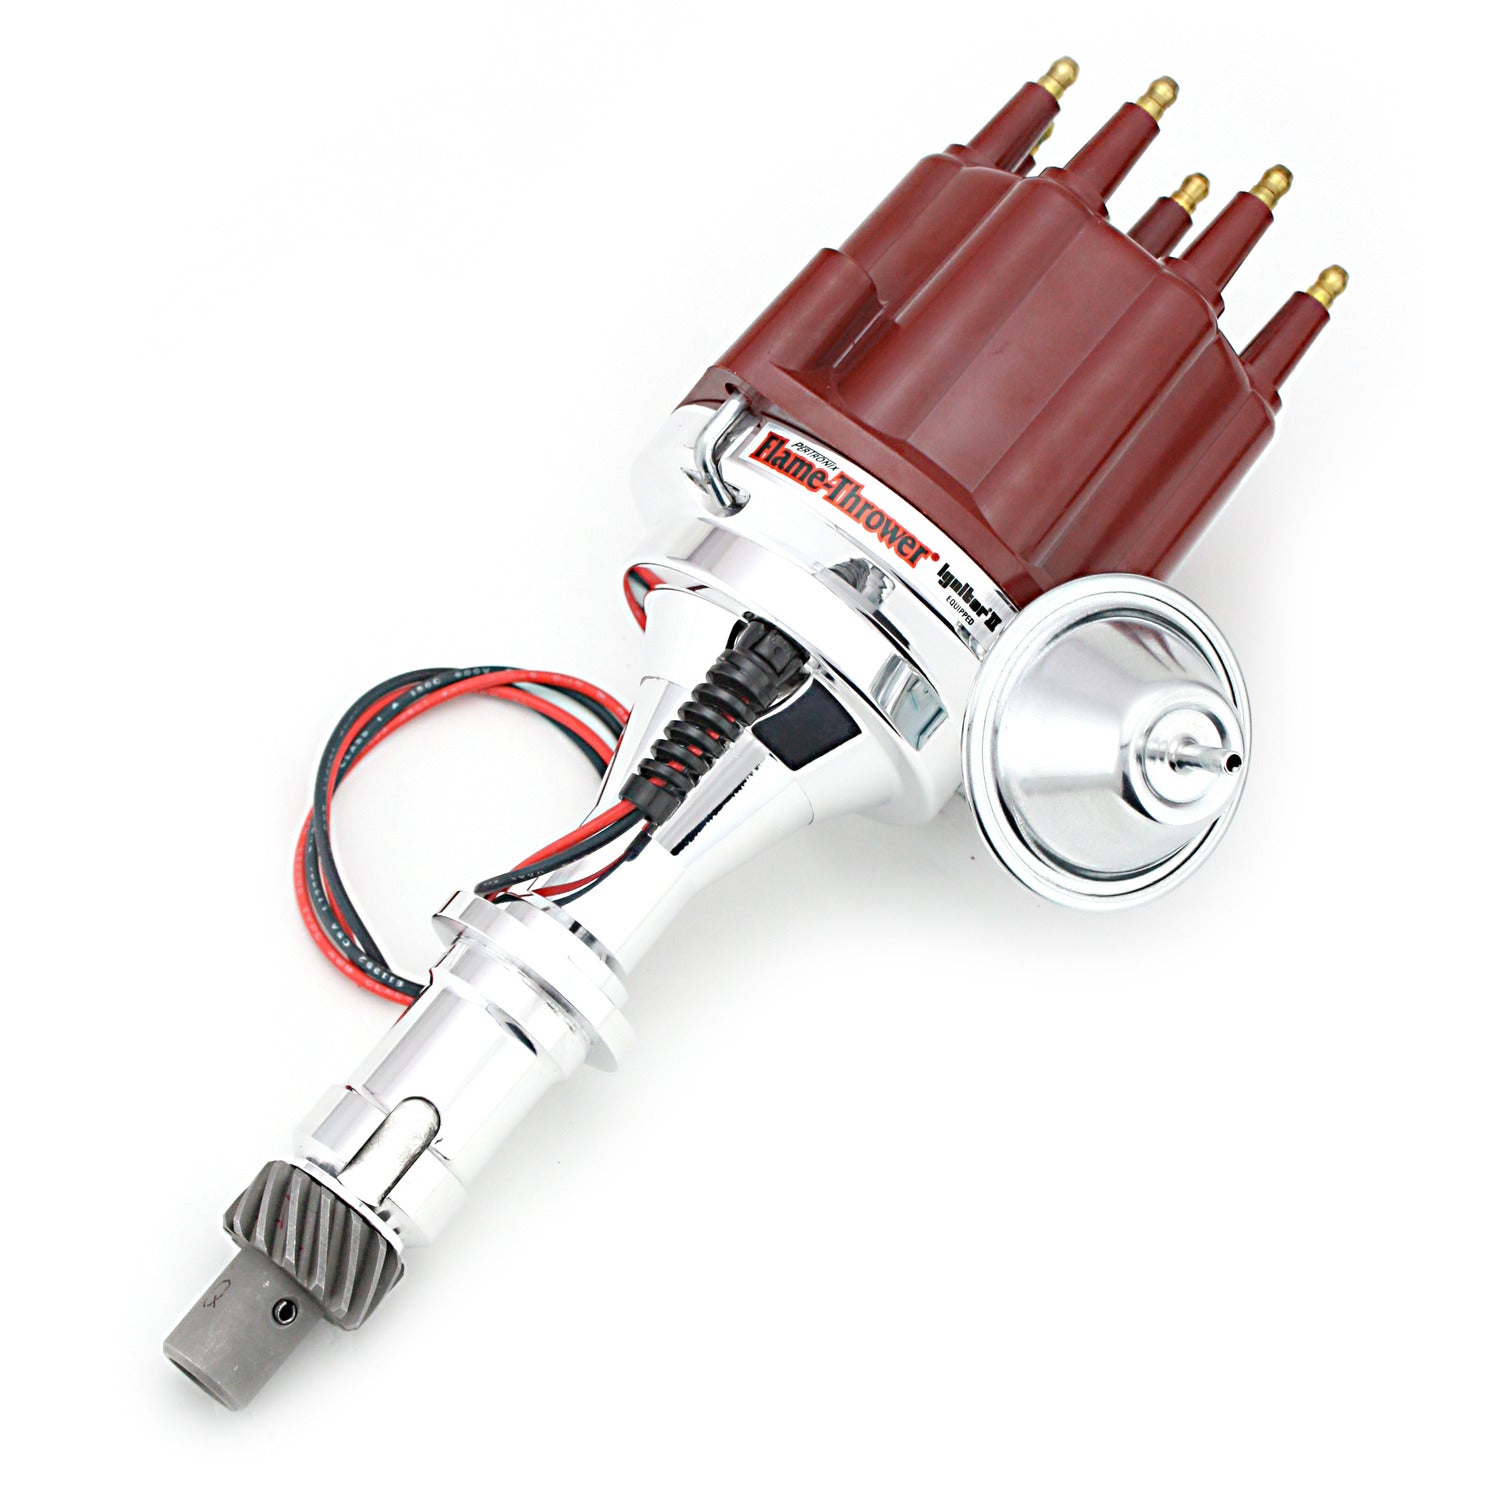 PerTronix D120711 Flame-Thrower Electronic Distributor Billet Pontiac V8 Plug and Play with Ignitor II Technology Vacuum Advance Red Male Cap